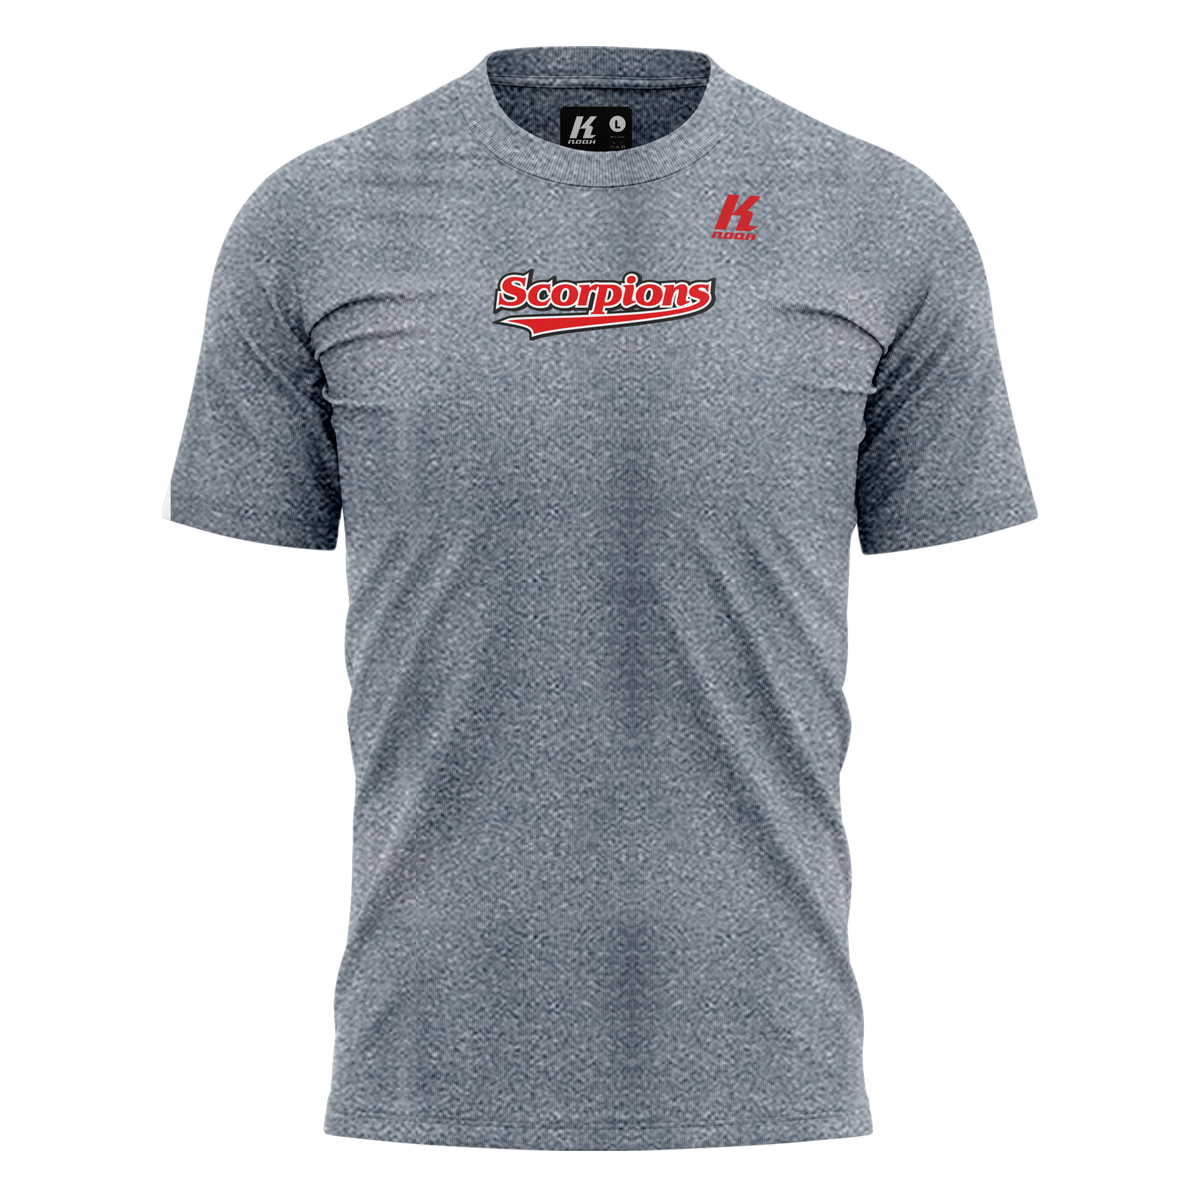 Tee_Performance_Teamname_Front